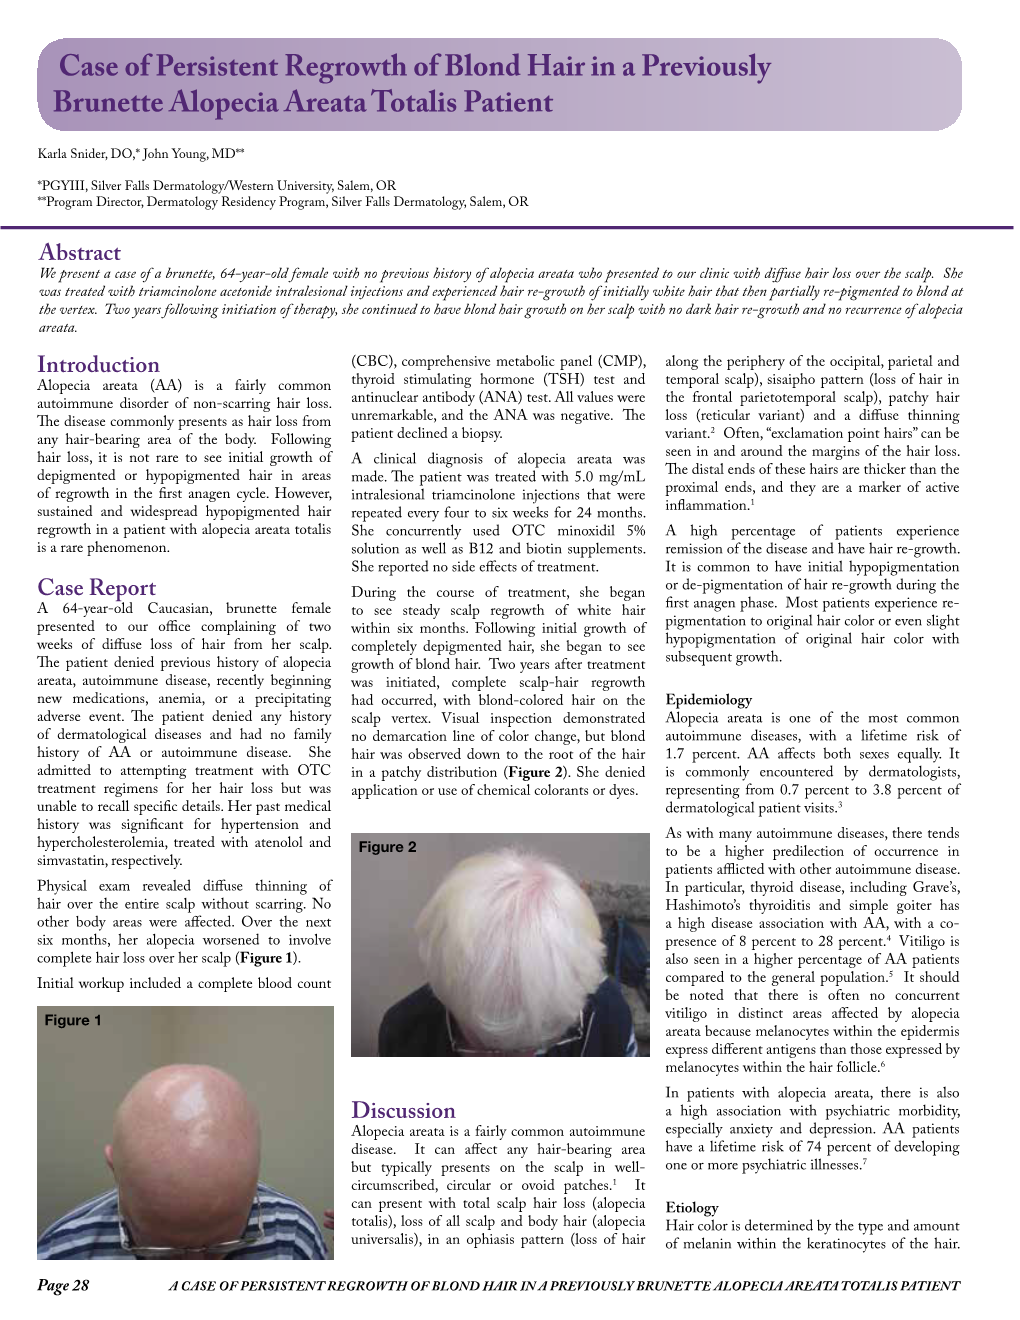 Case of Persistent Regrowth of Blond Hair in a Previously Brunette Alopecia Areata Totalis Patient